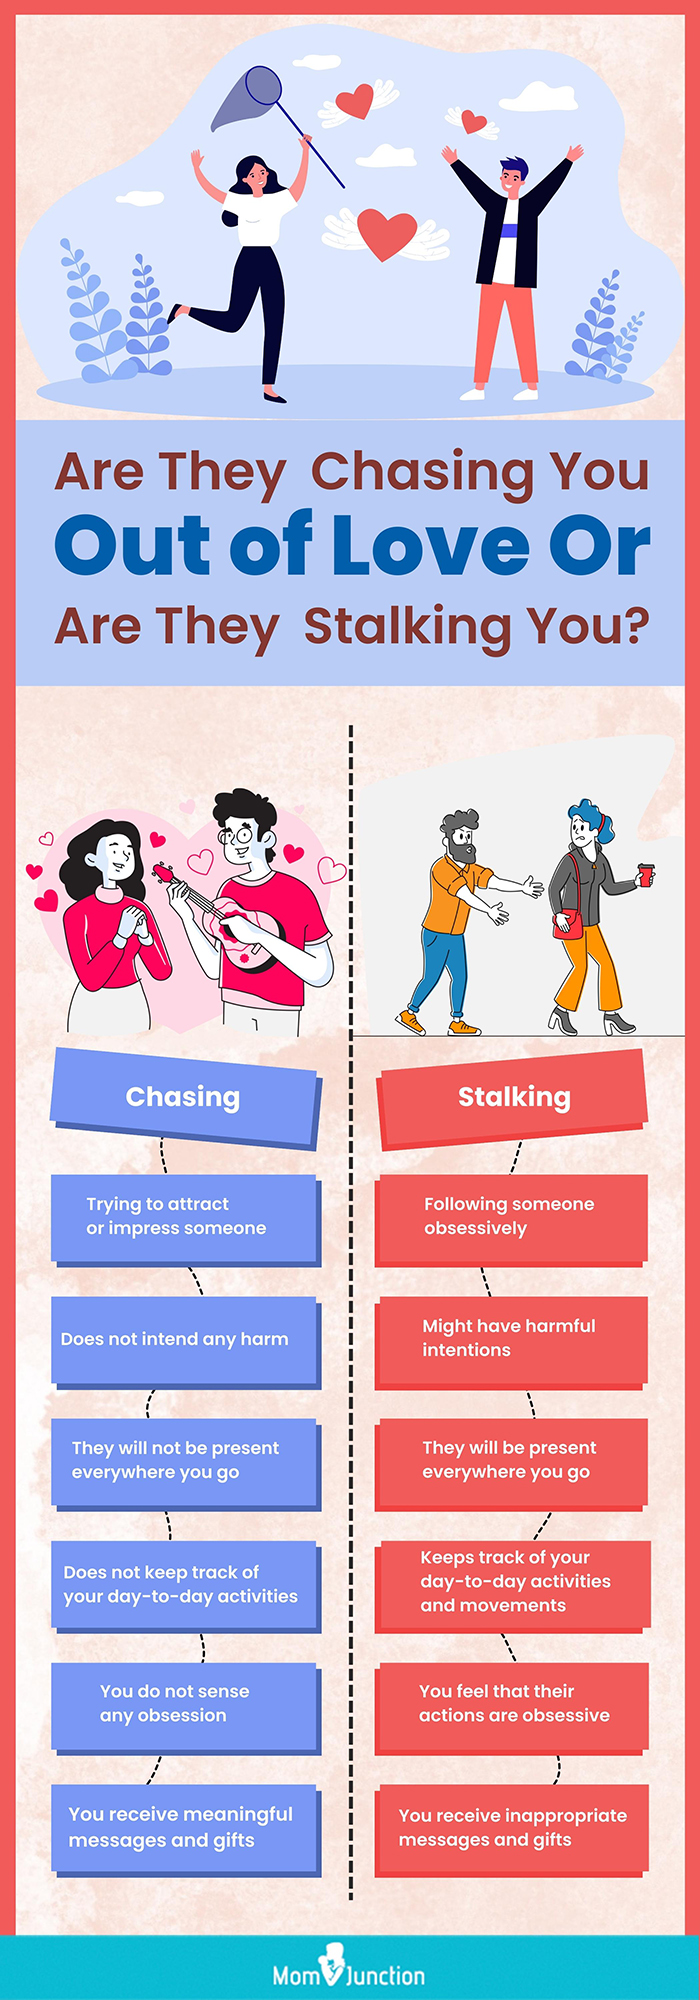 differences between chasing someone and stalking someone (infographic)